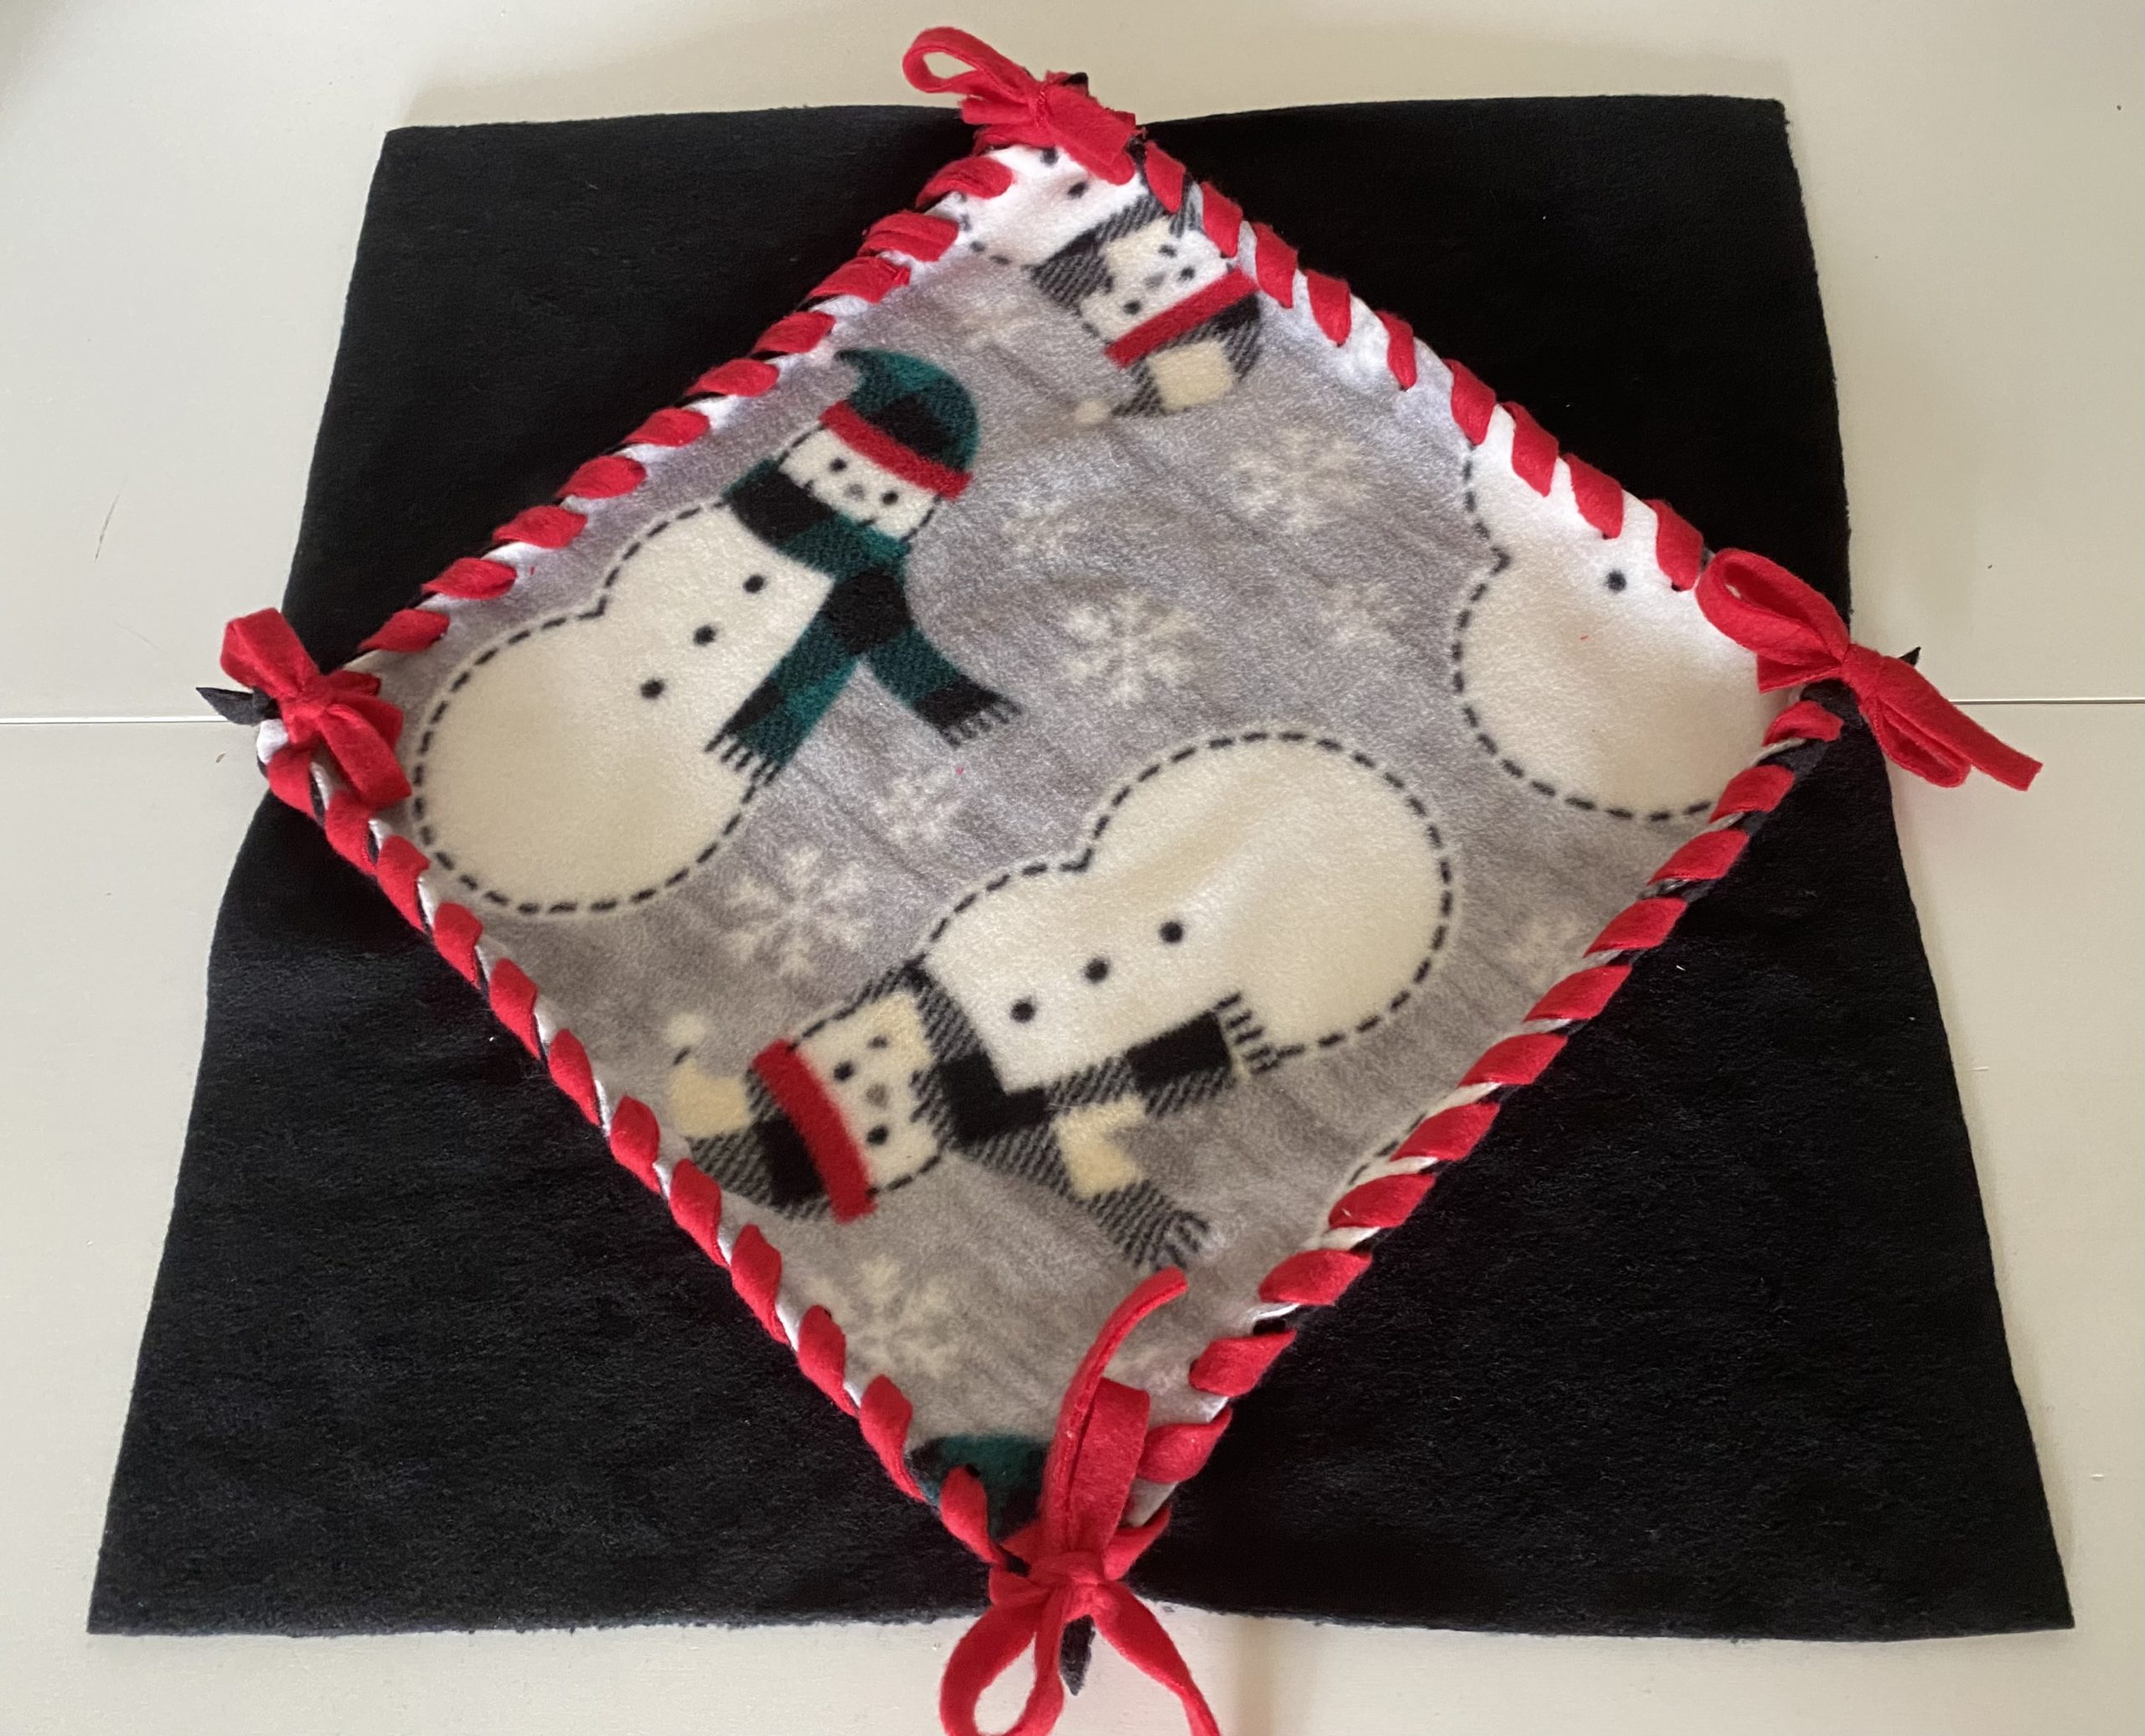 Fleece 18 inch Christmas Diamond Table Topper - Black, Red & Gray with  Snowman Pattern, Red fleece lacing around perimeters - Mitsy Kit